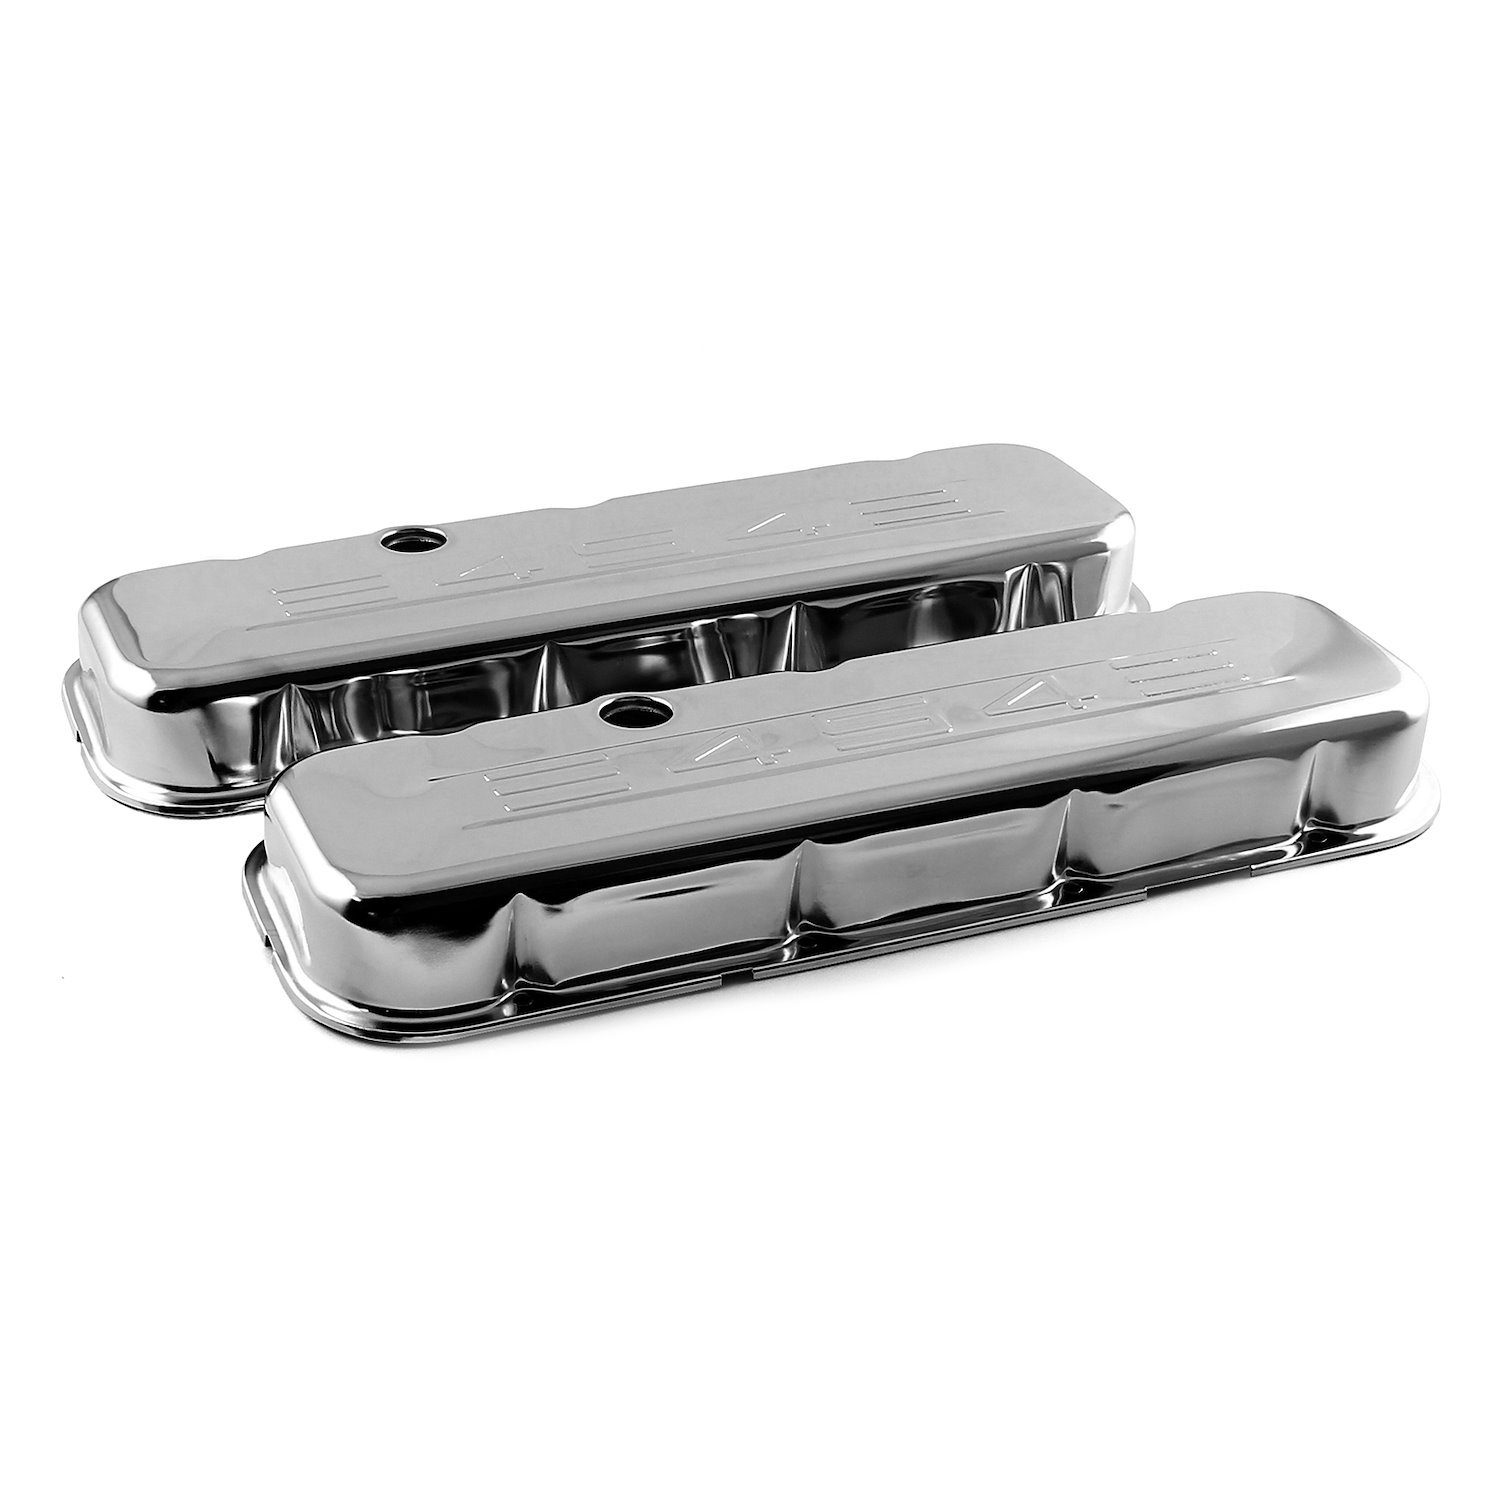 PCE314.1041.02 Chevy BBC 454 Chrome  in.454 Stamped in. Steel Valve Covers - Short w/ Baffled Hole